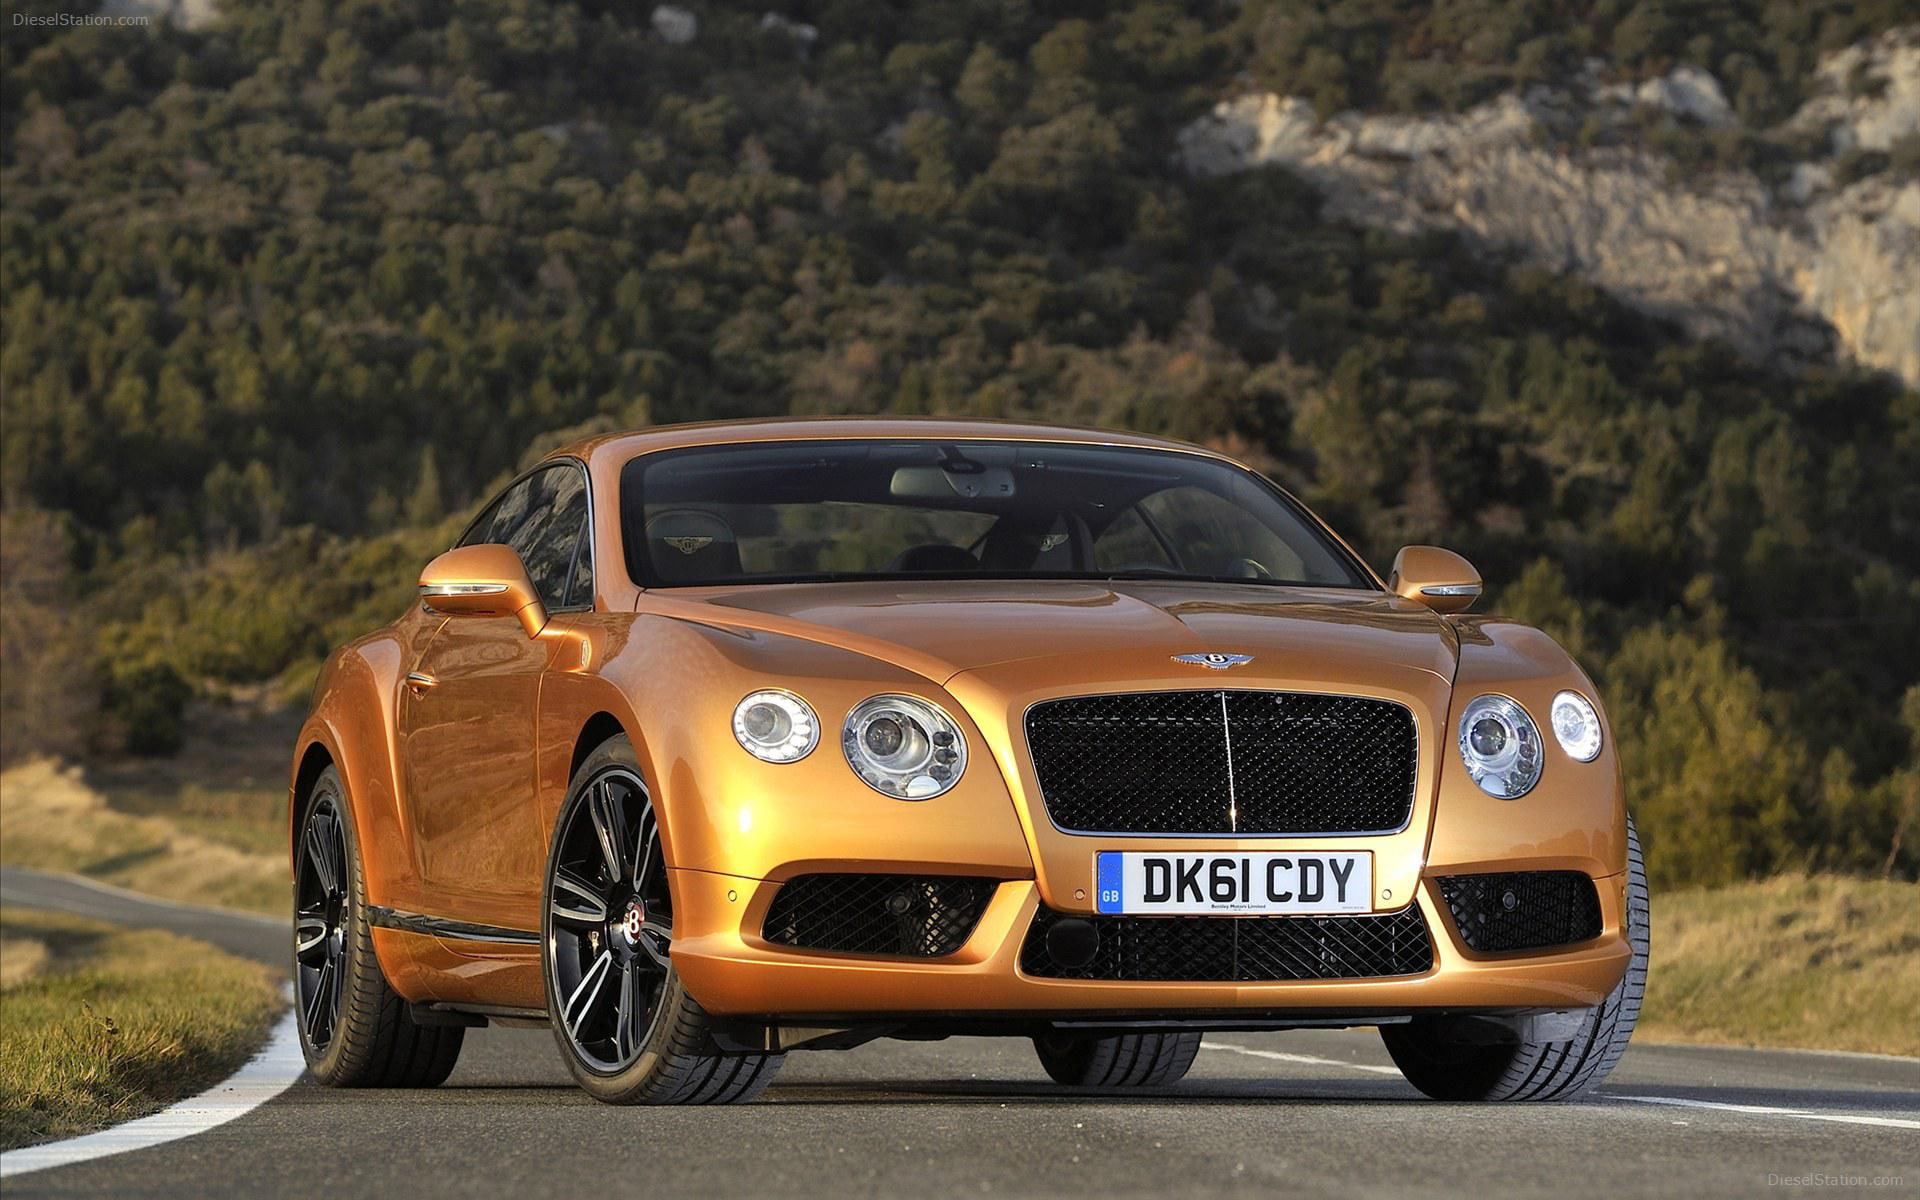 2012 Bentley Continental GT V8, gold ford mustang luxury car